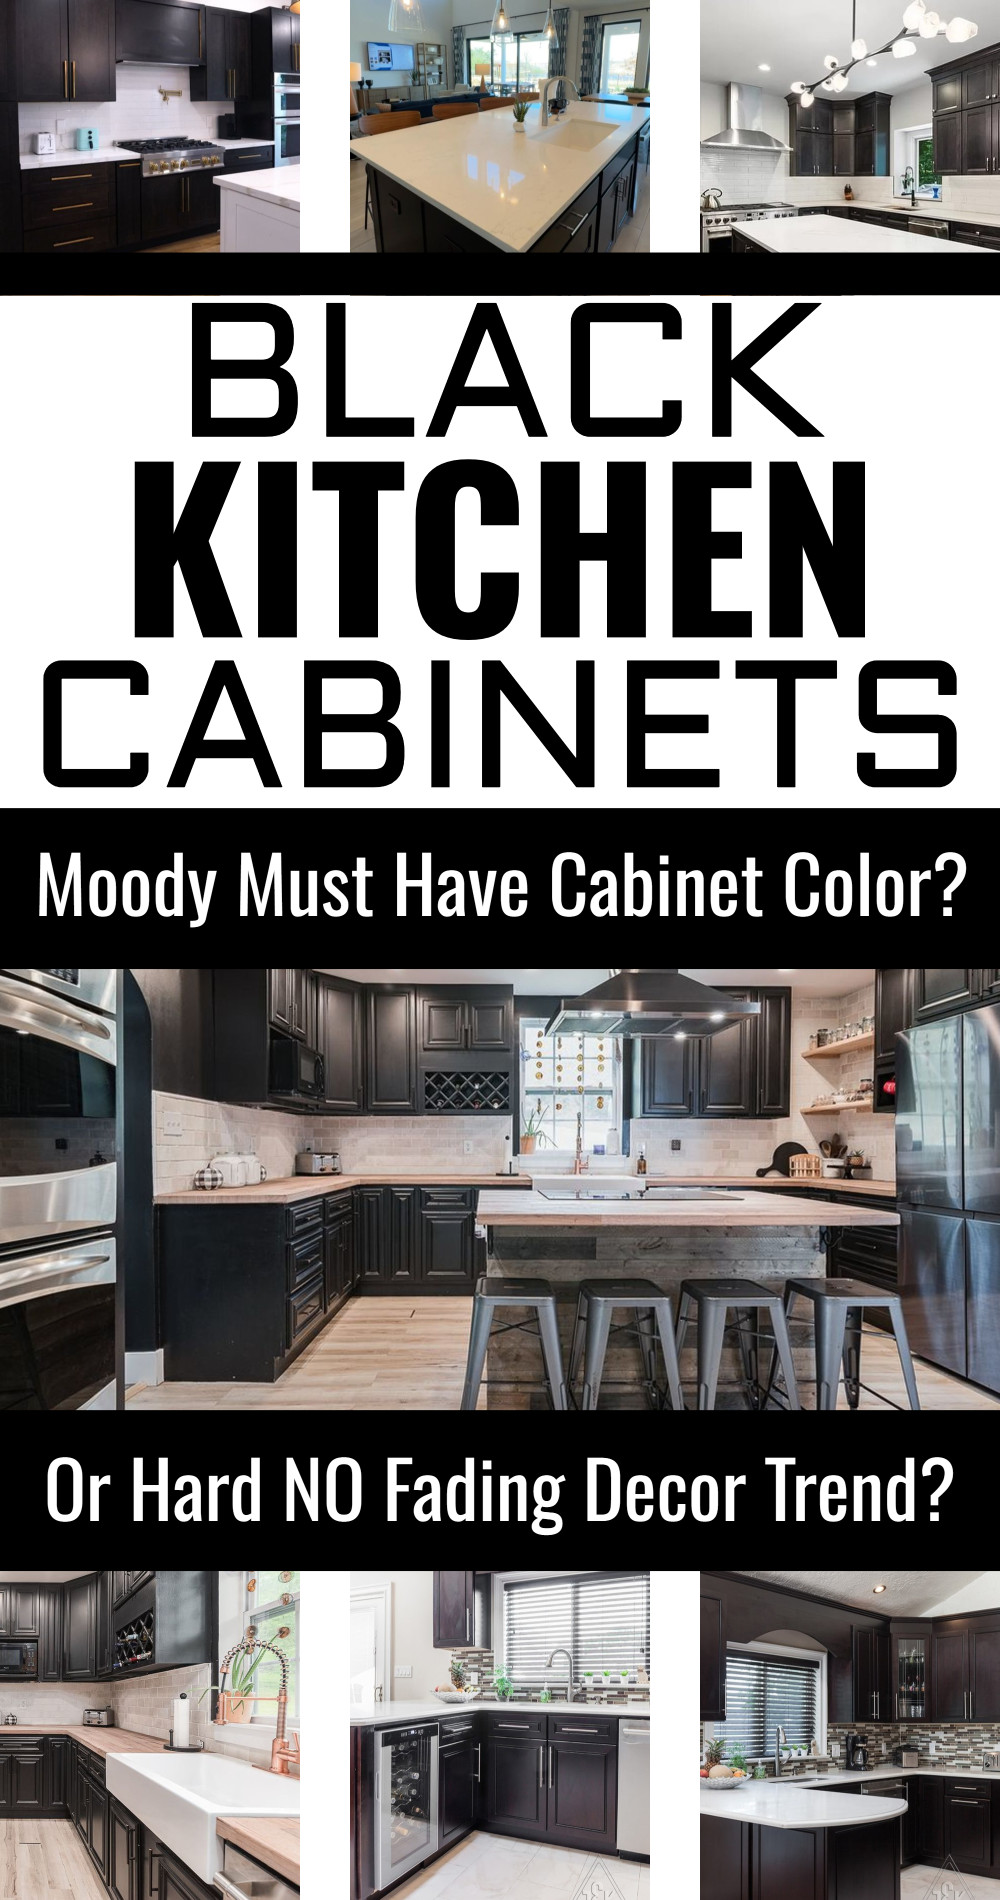 Black kitchen cabinets moody must have cabinet paint color scheme or fading decor trend?